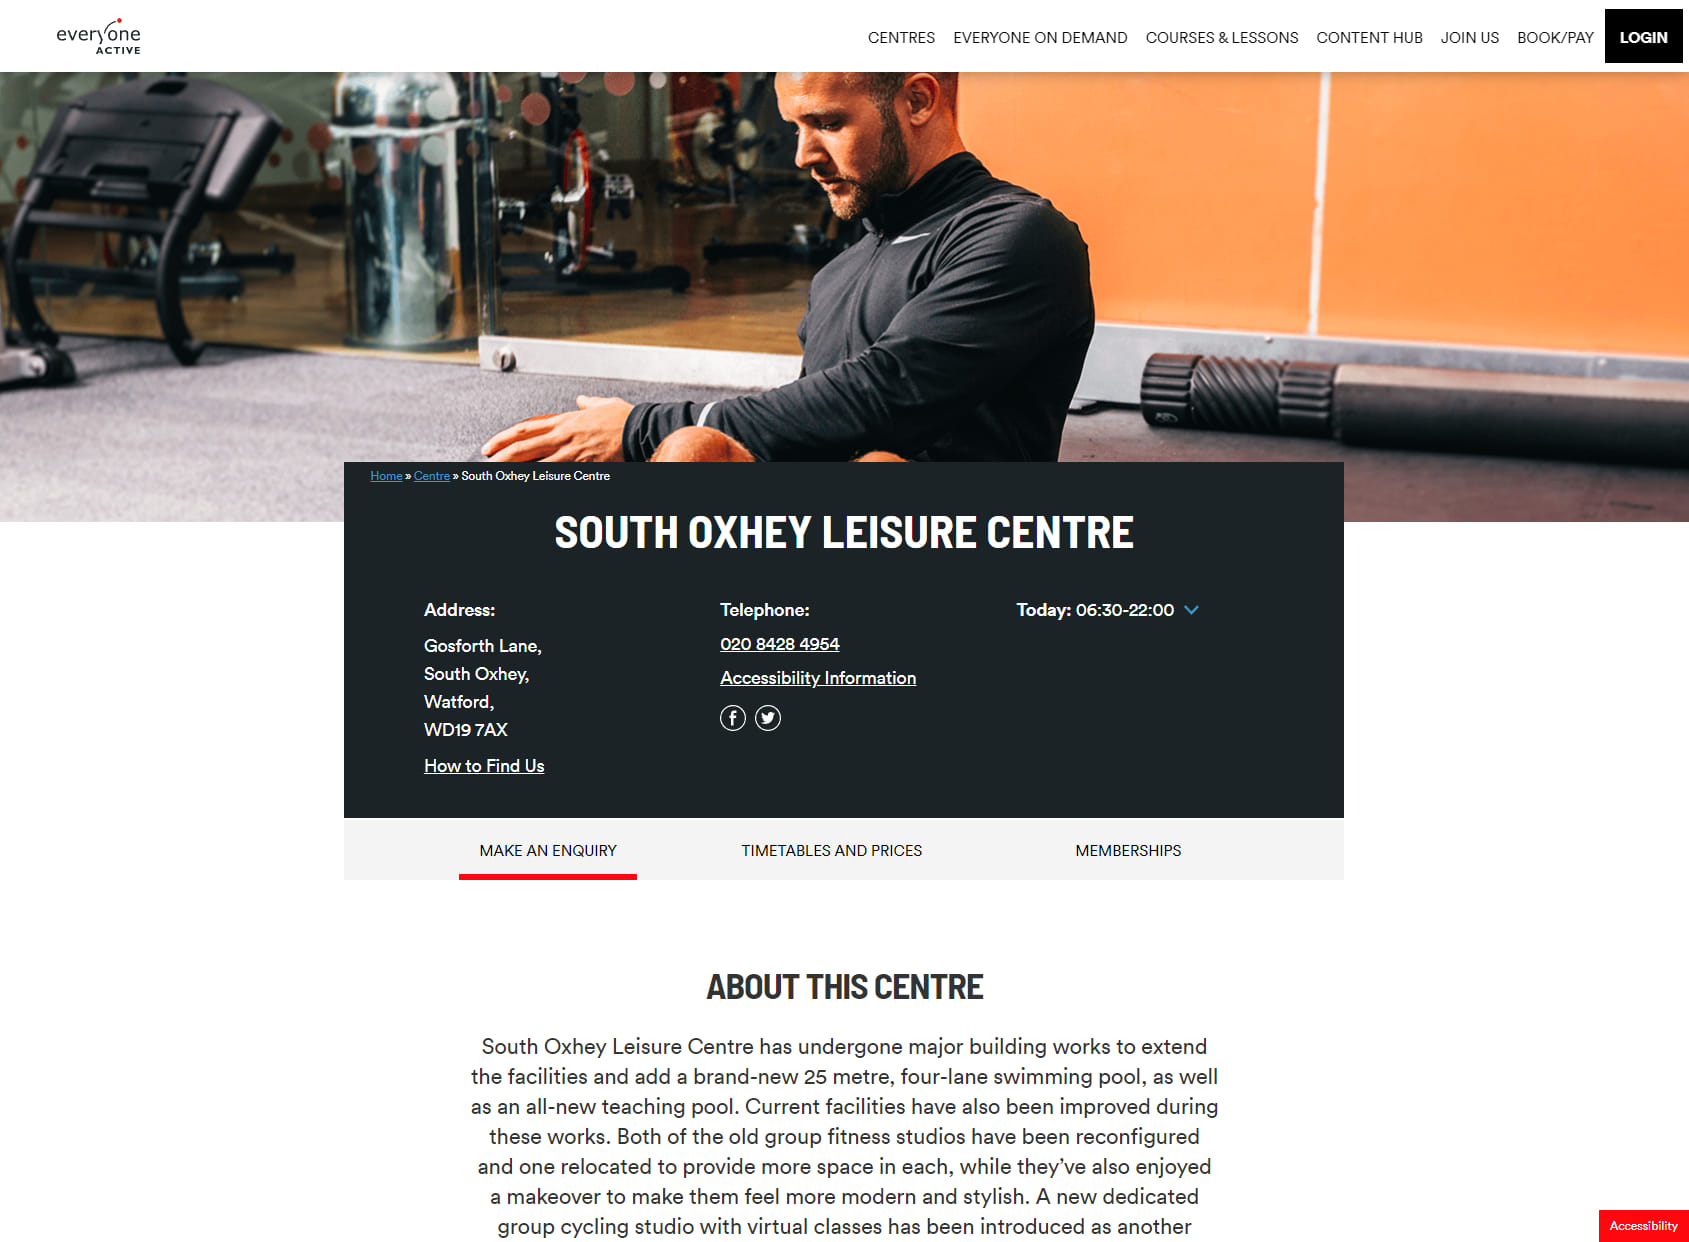 South Oxhey Leisure Centre